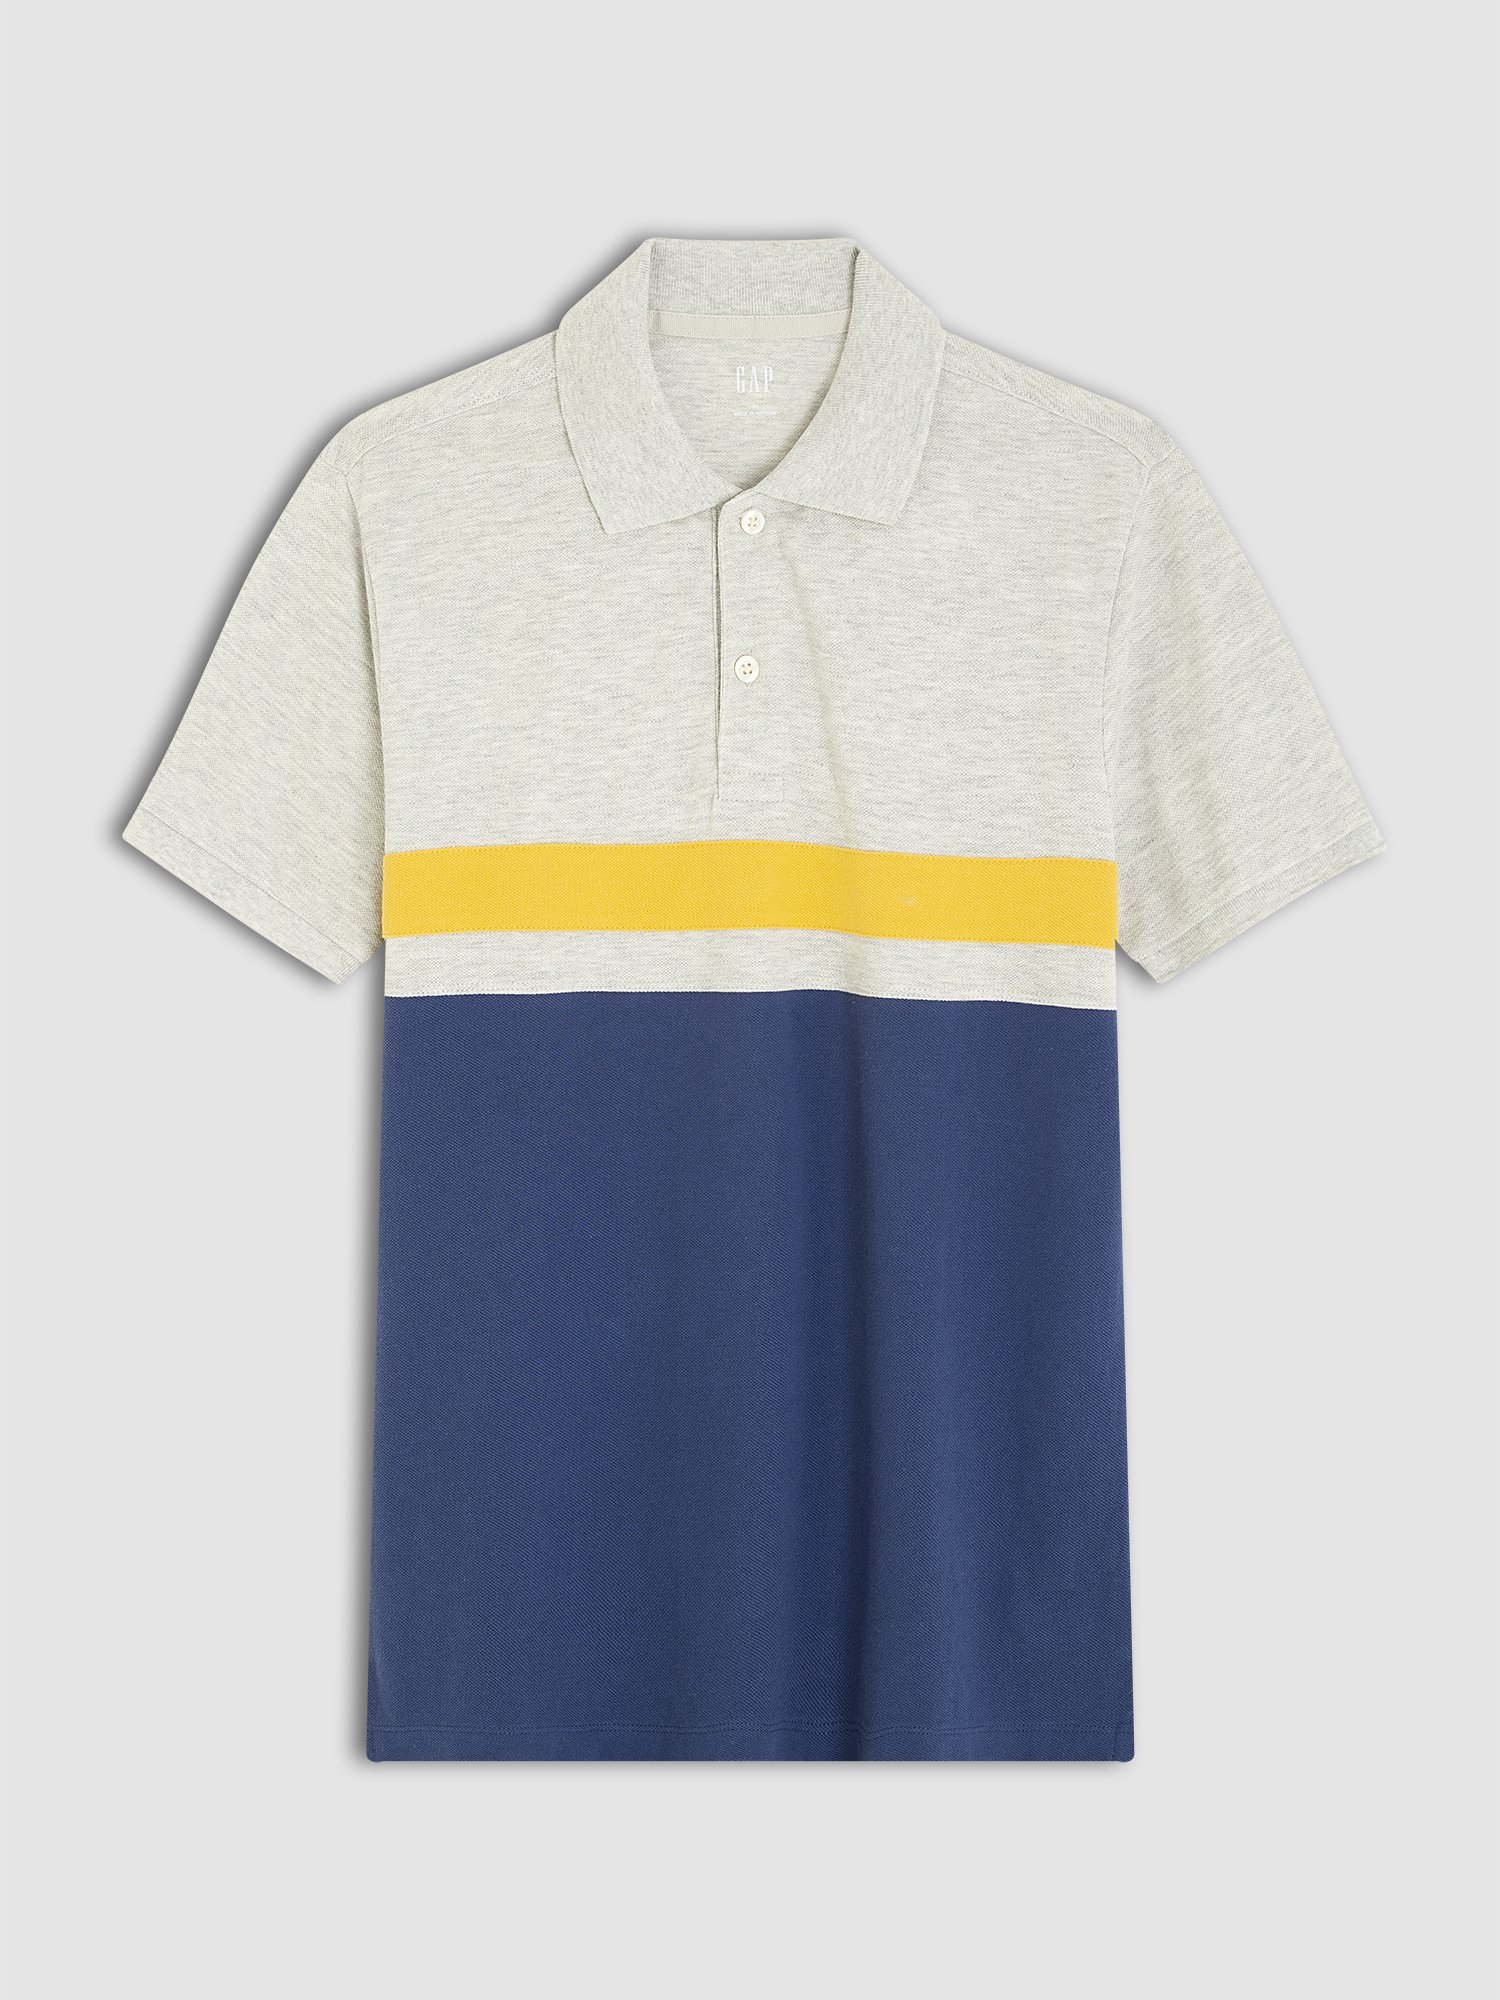 Pique Polo T-Shirt product image